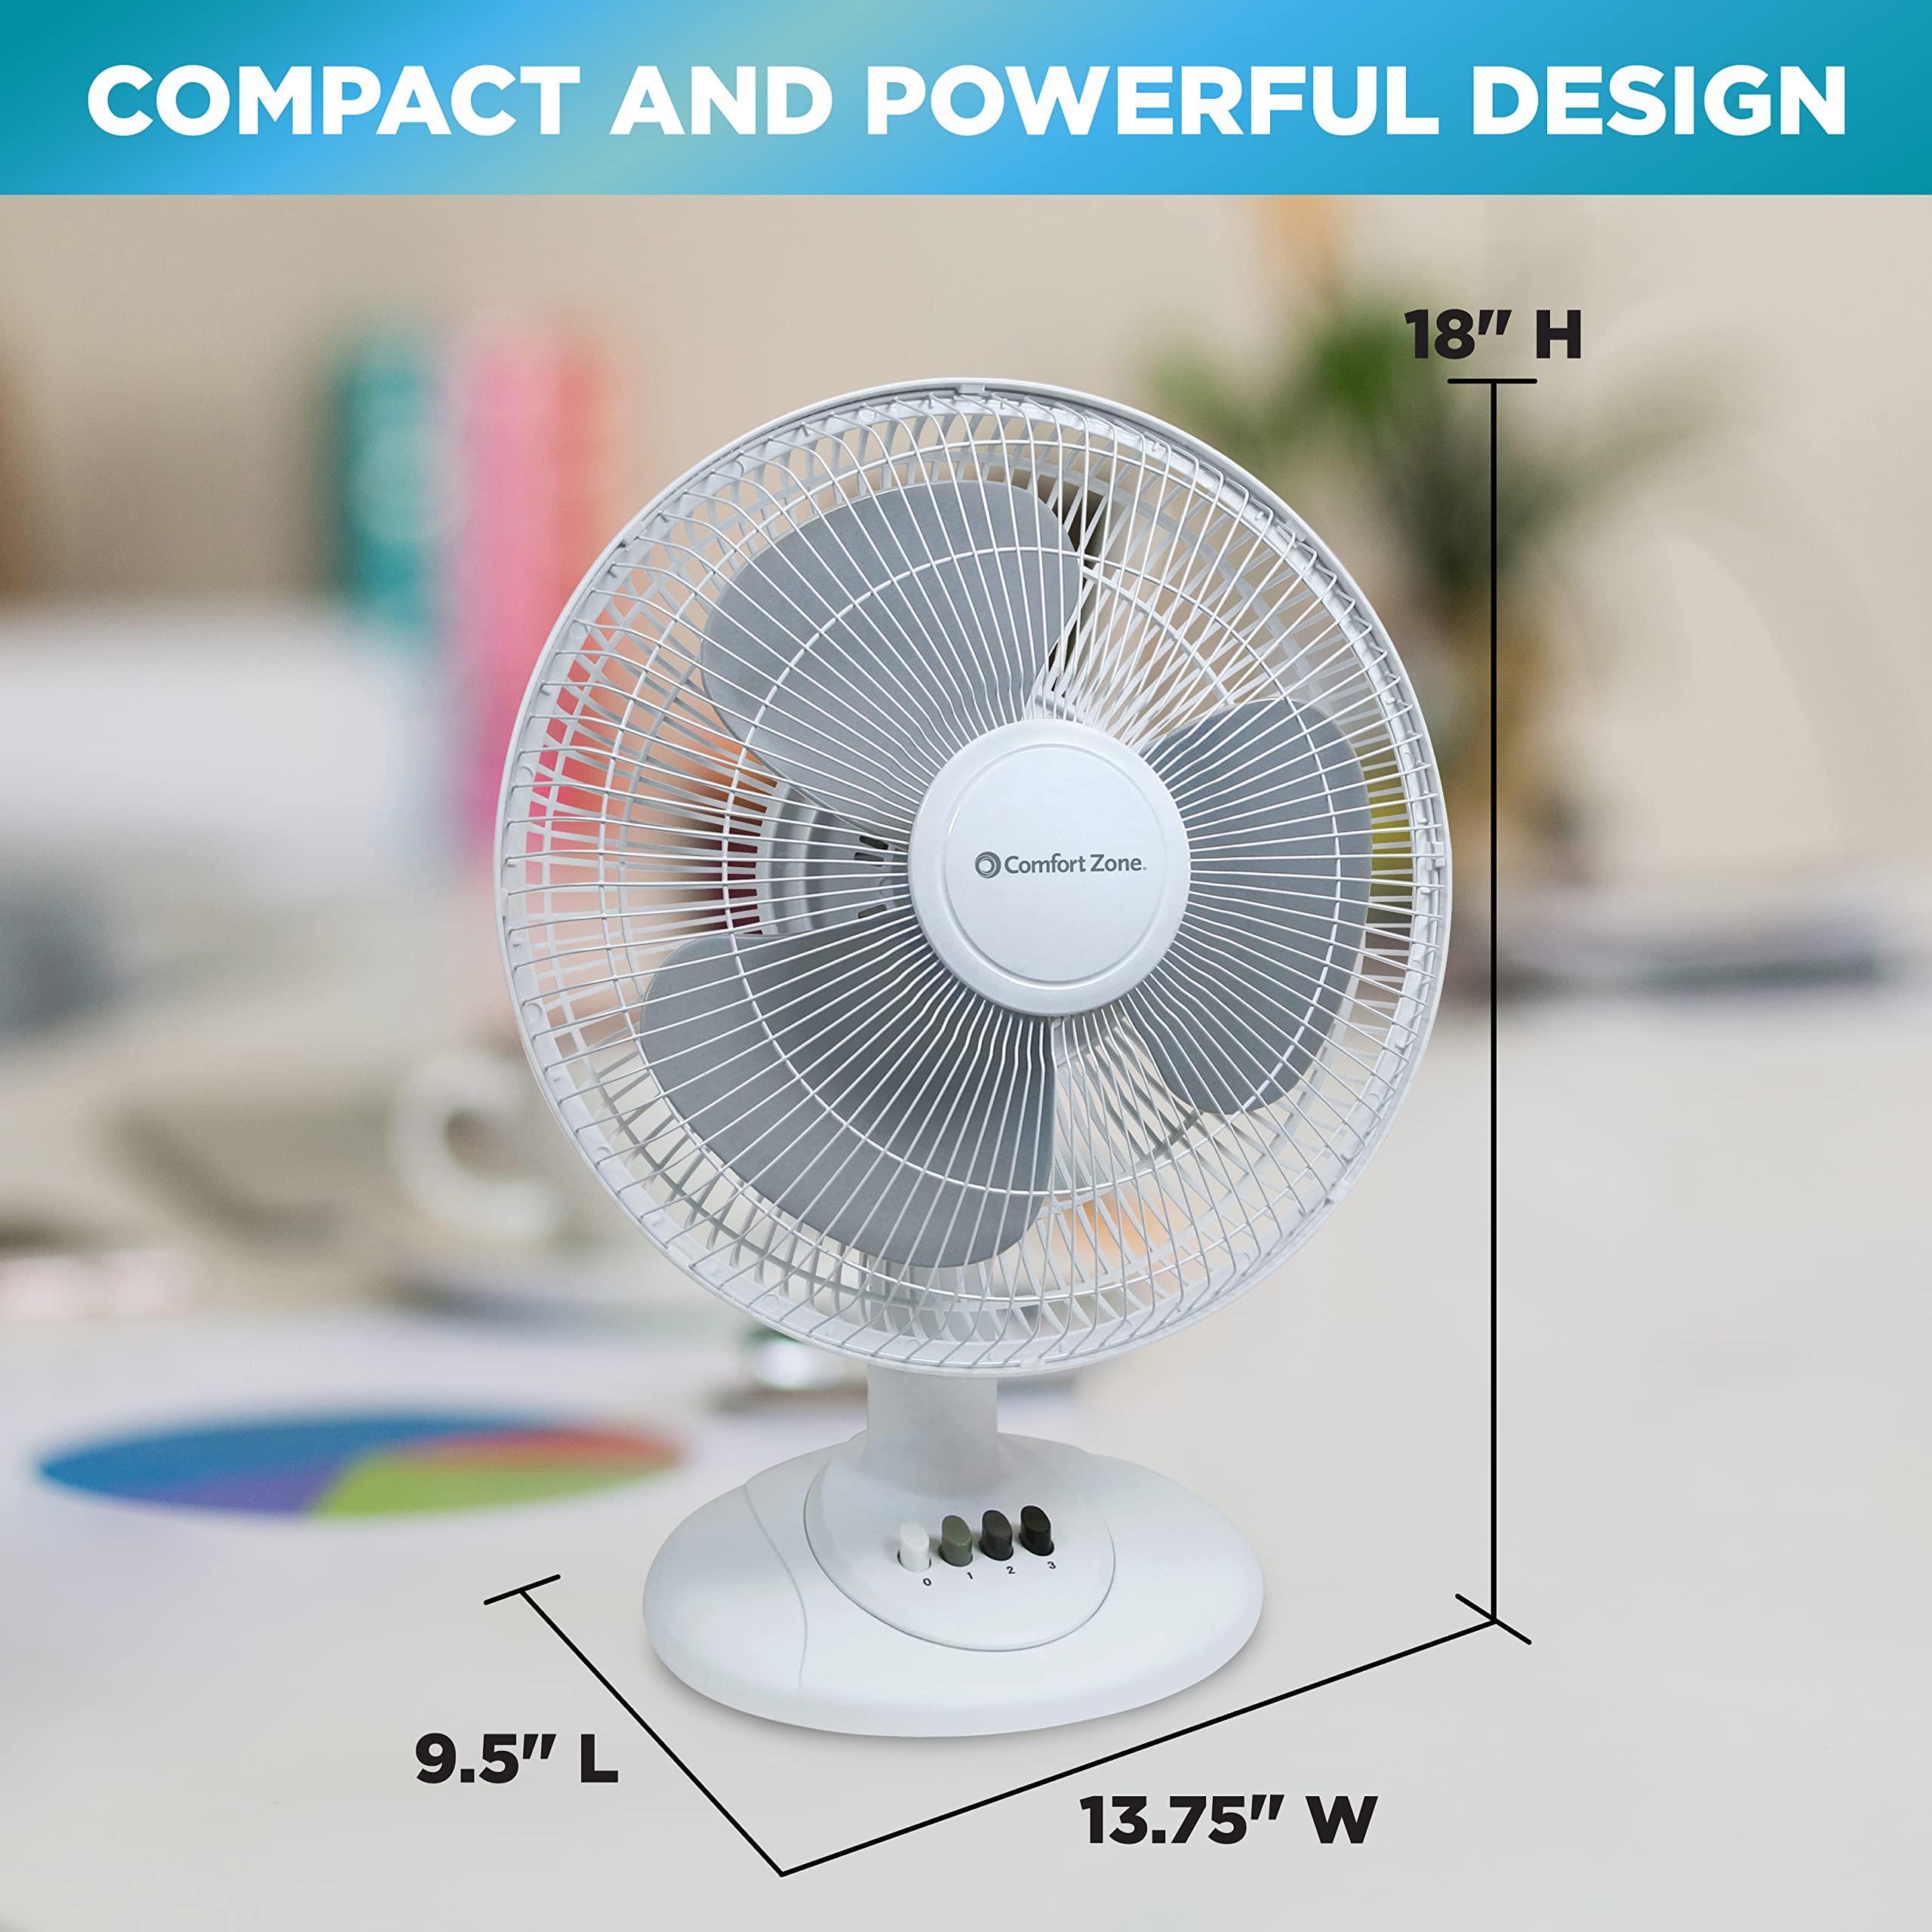 Comfort Zone CZ121WT 12” 3-Speed Oscillating Table Fan with Adjustable Tilt, Convenient Push Button Controls, Quiet Operation, White